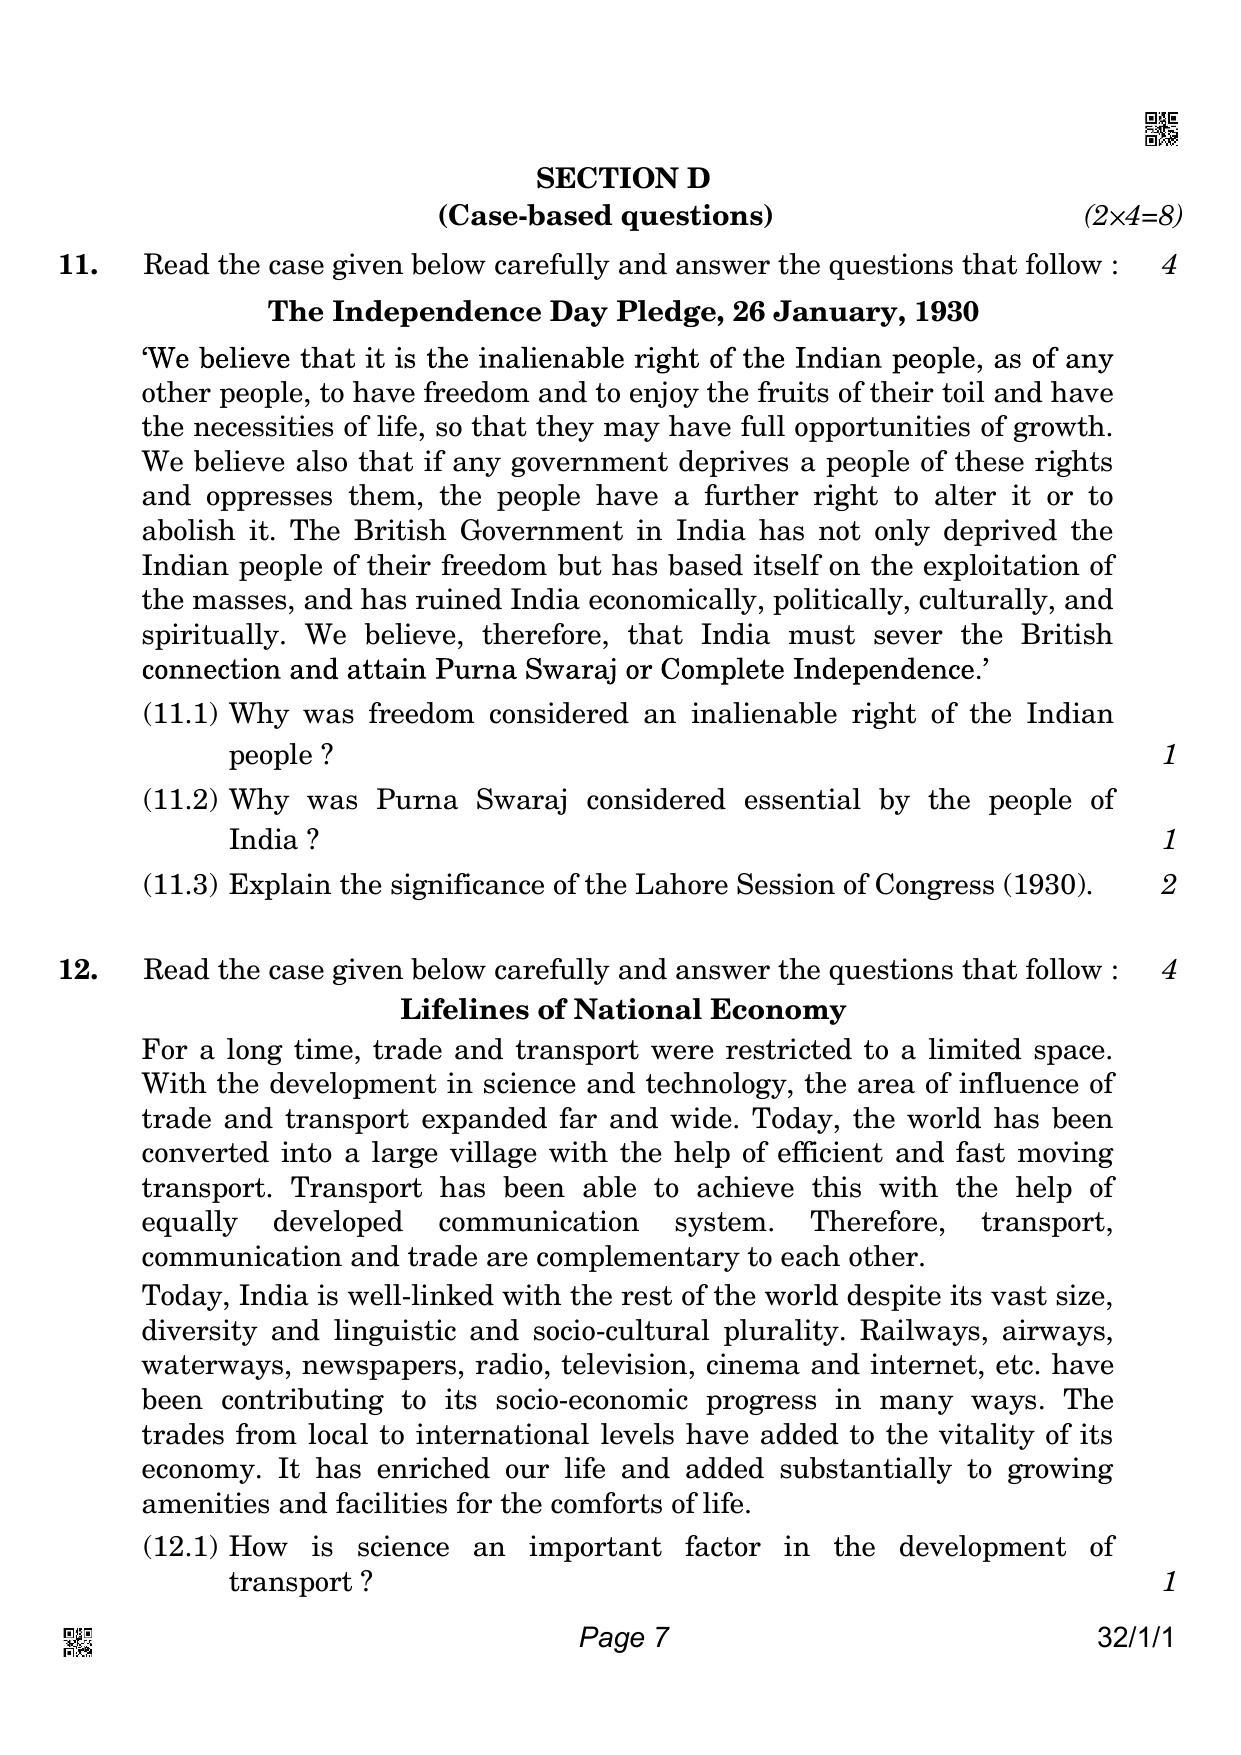 CBSE Class 10 32-1-1 Social Science 2022 Question Paper - Page 7